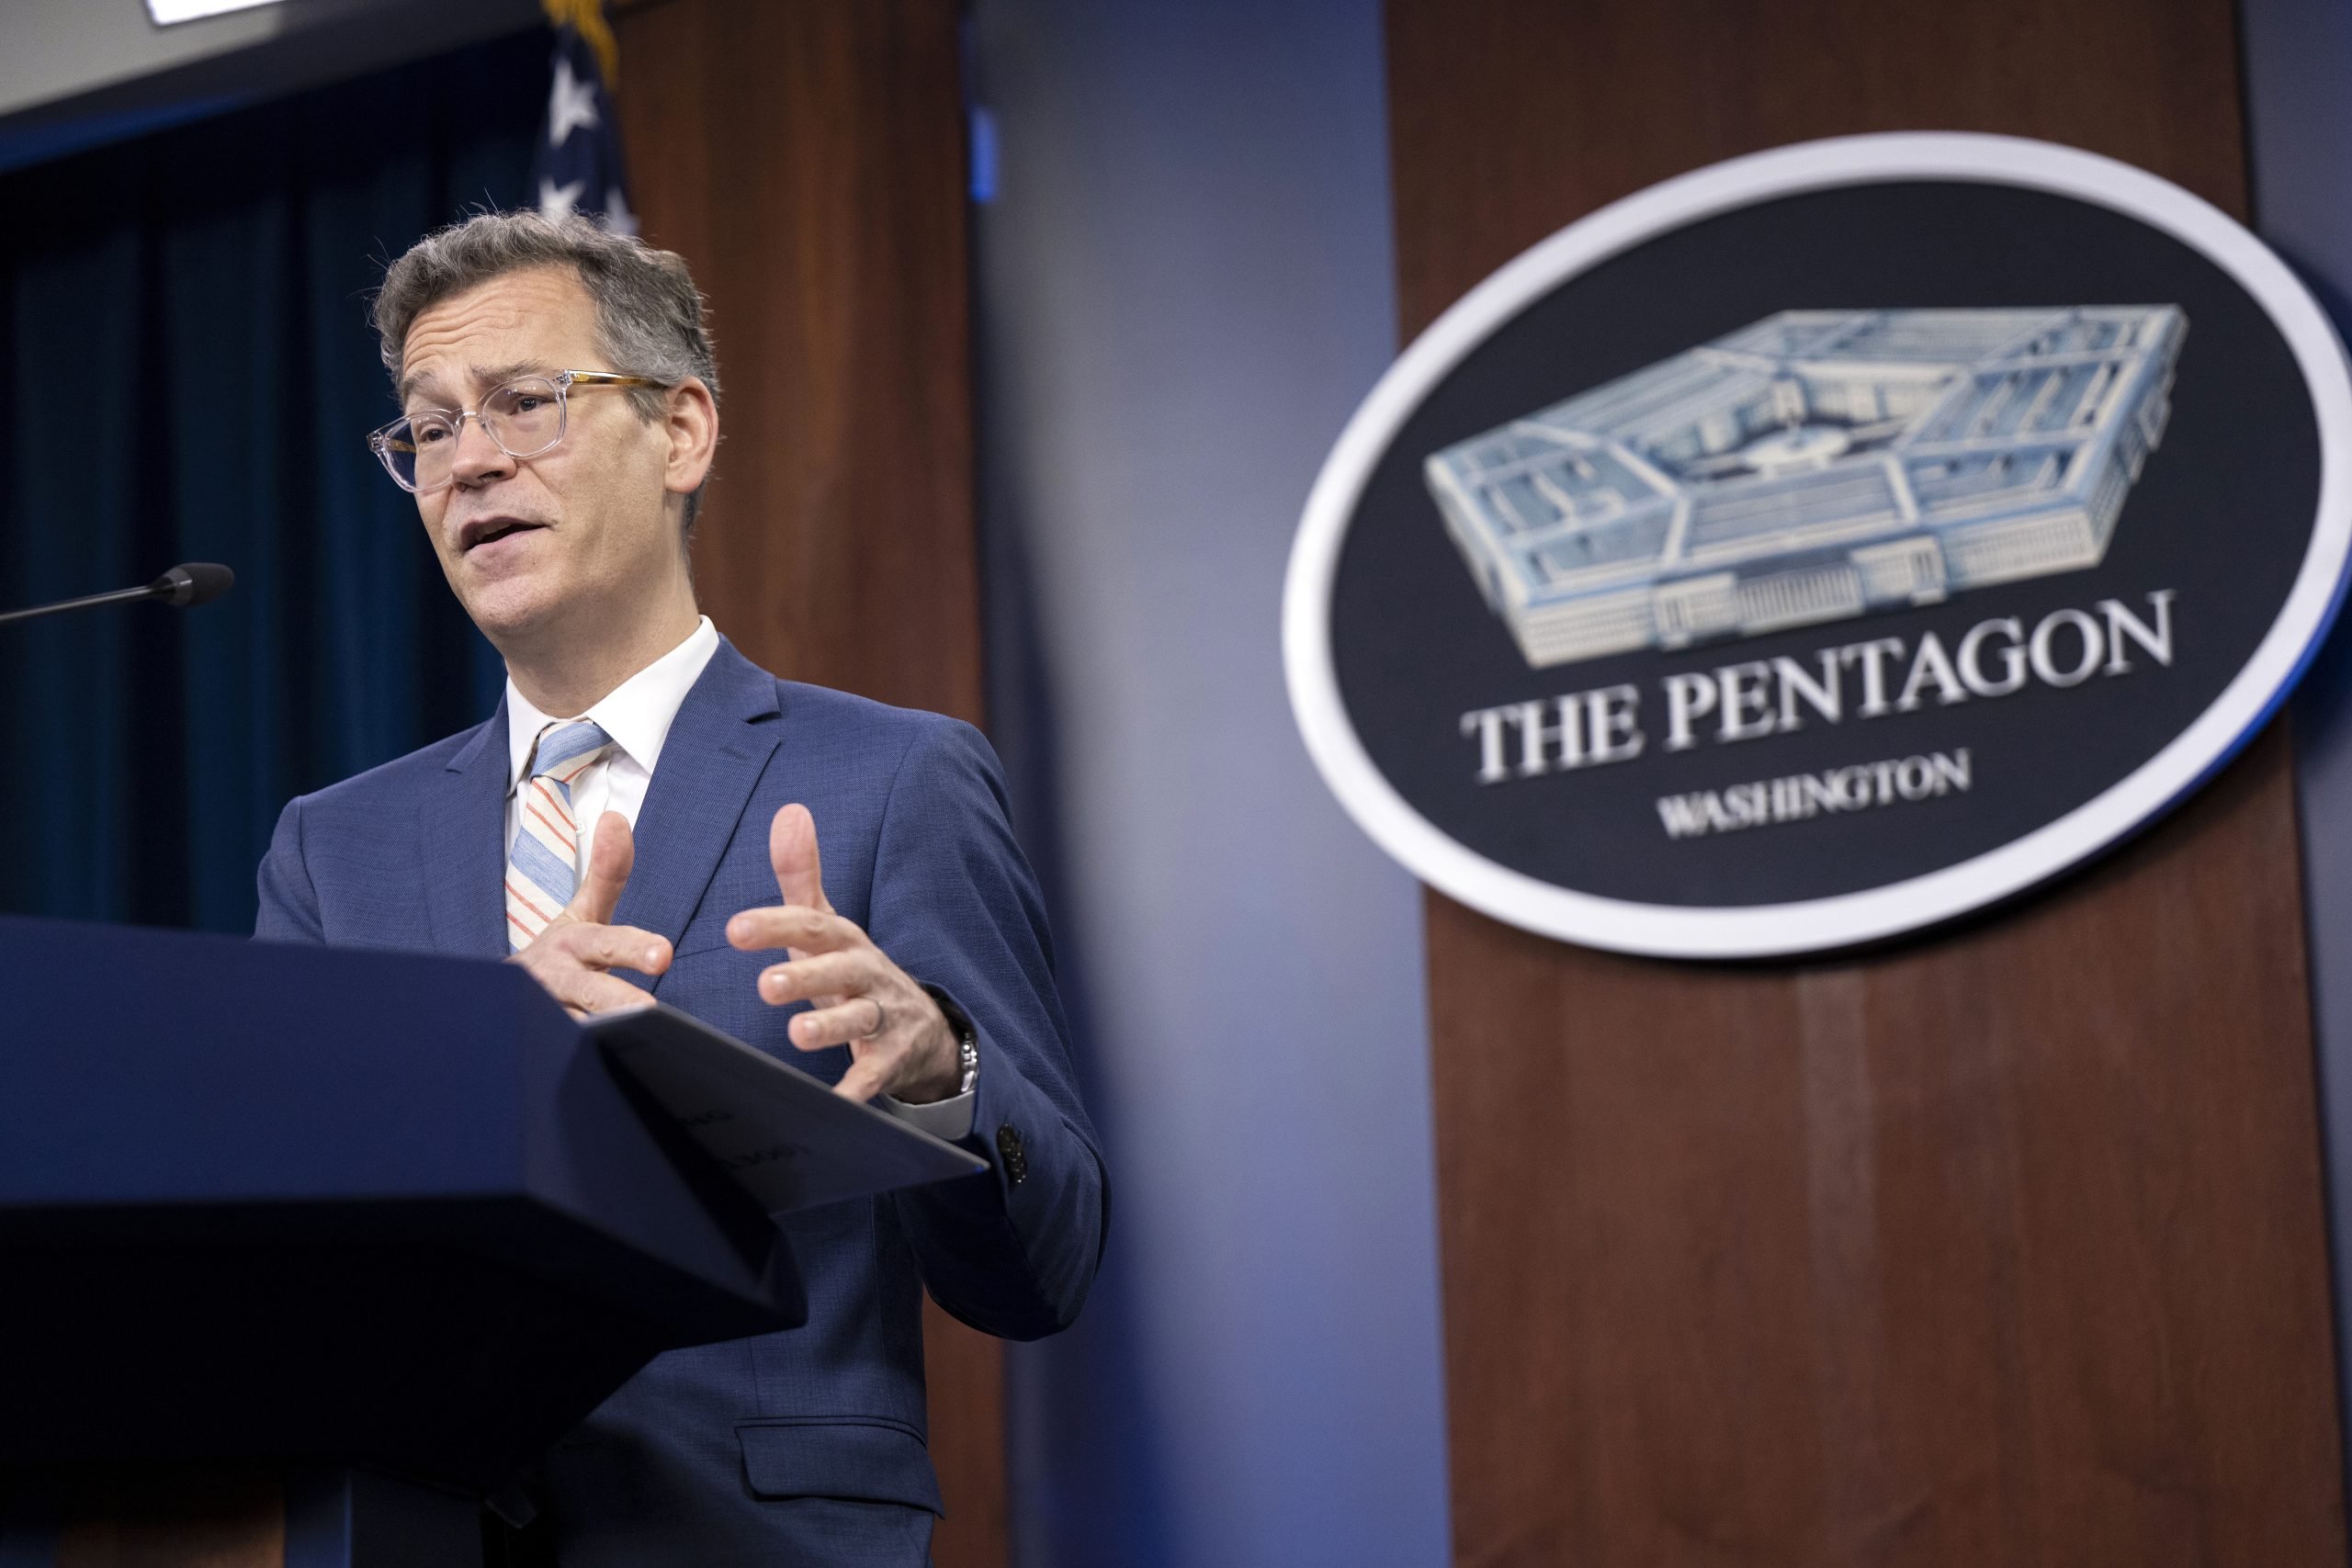 Pentagon announces security assistance up to $1 billion to meet Ukraine’s security and defense needs